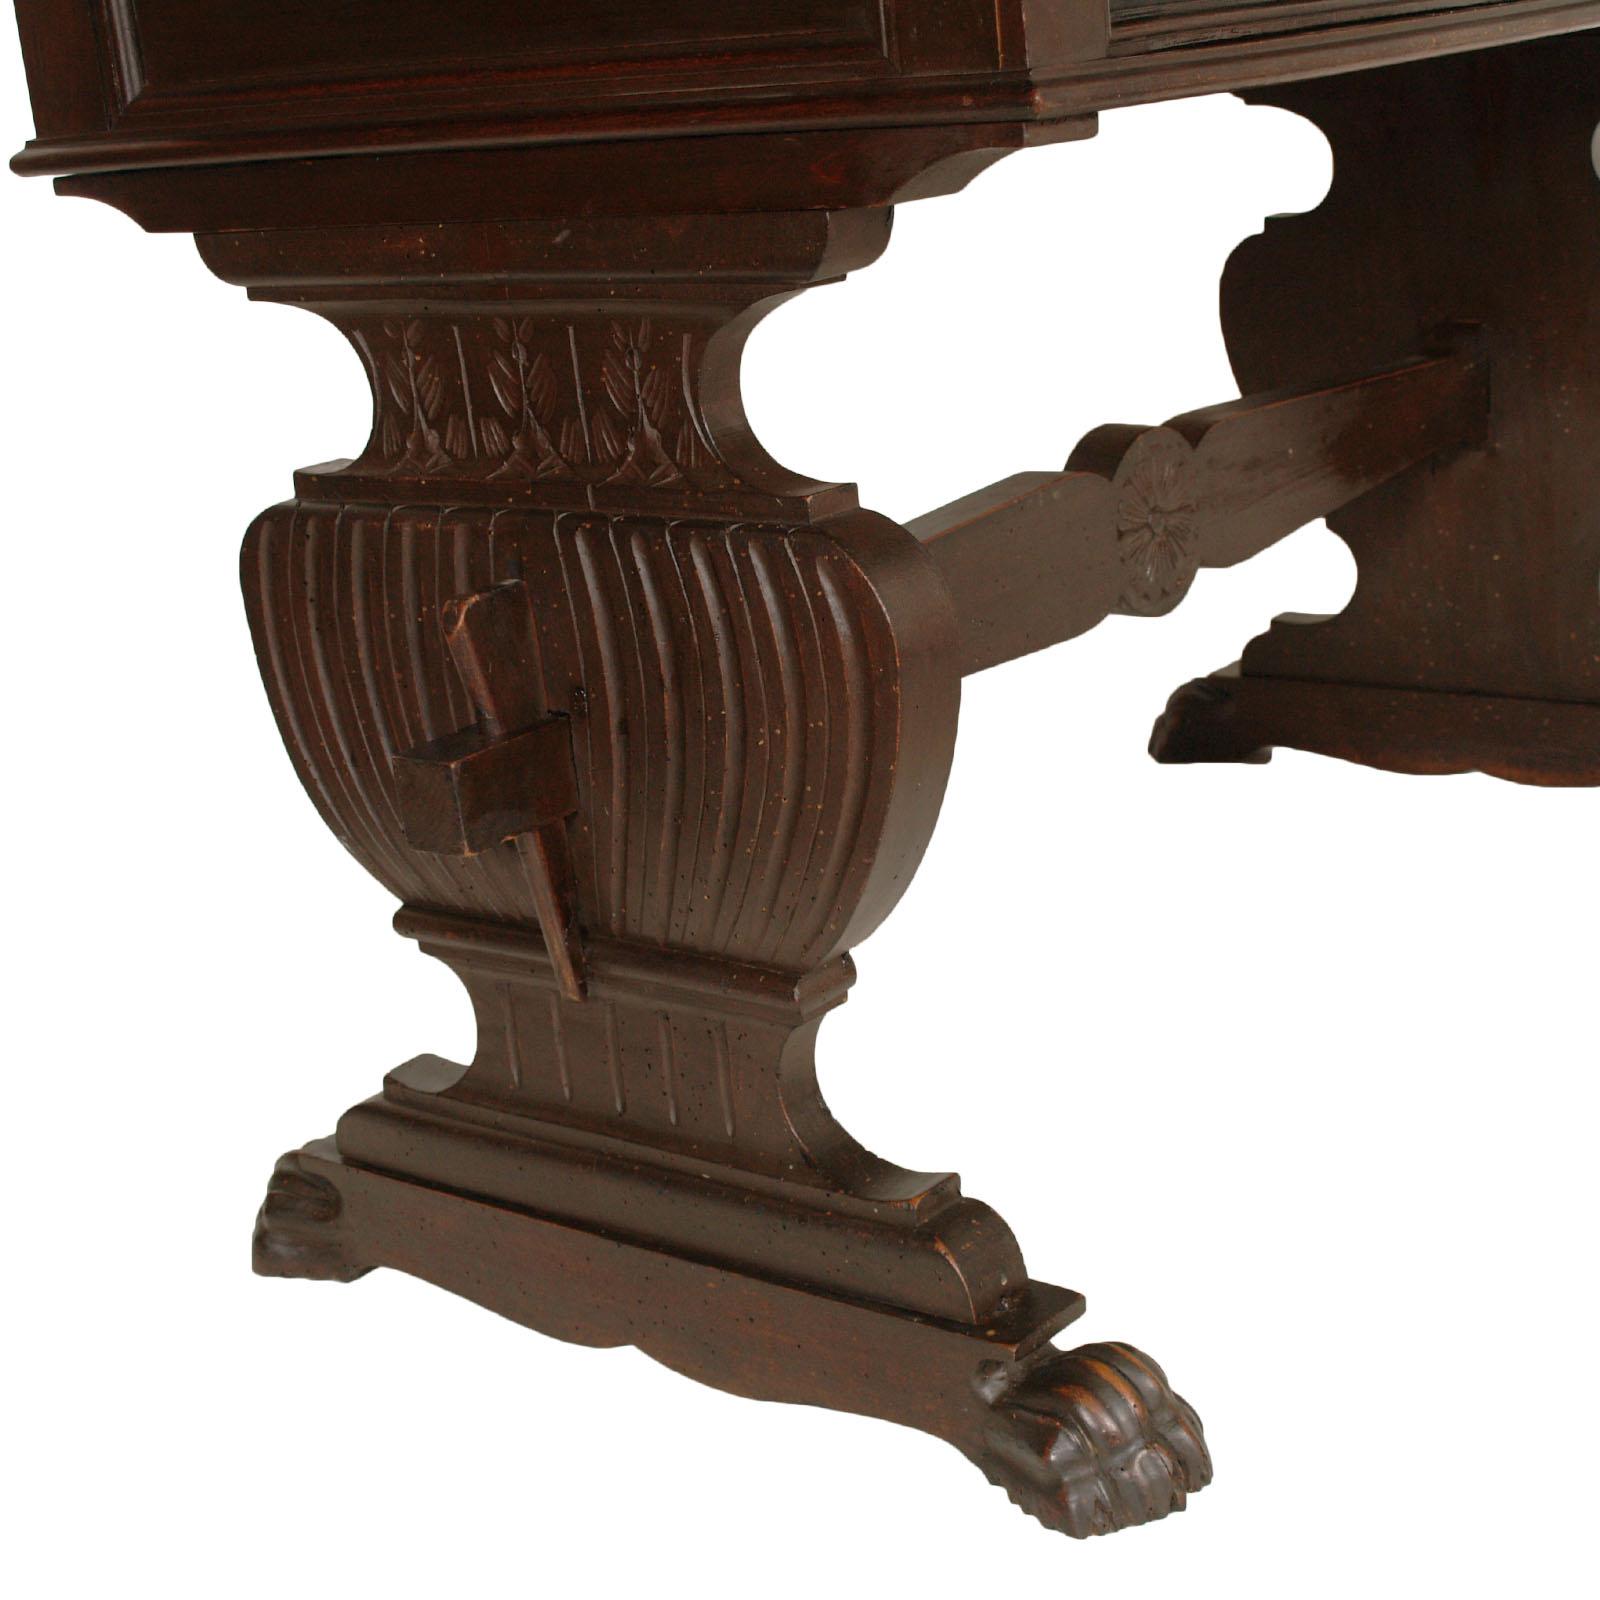 Hand-Carved Mid-19th Century Tuscan Renaissance Antique Table Desk Hand Carved Solid Walnut For Sale